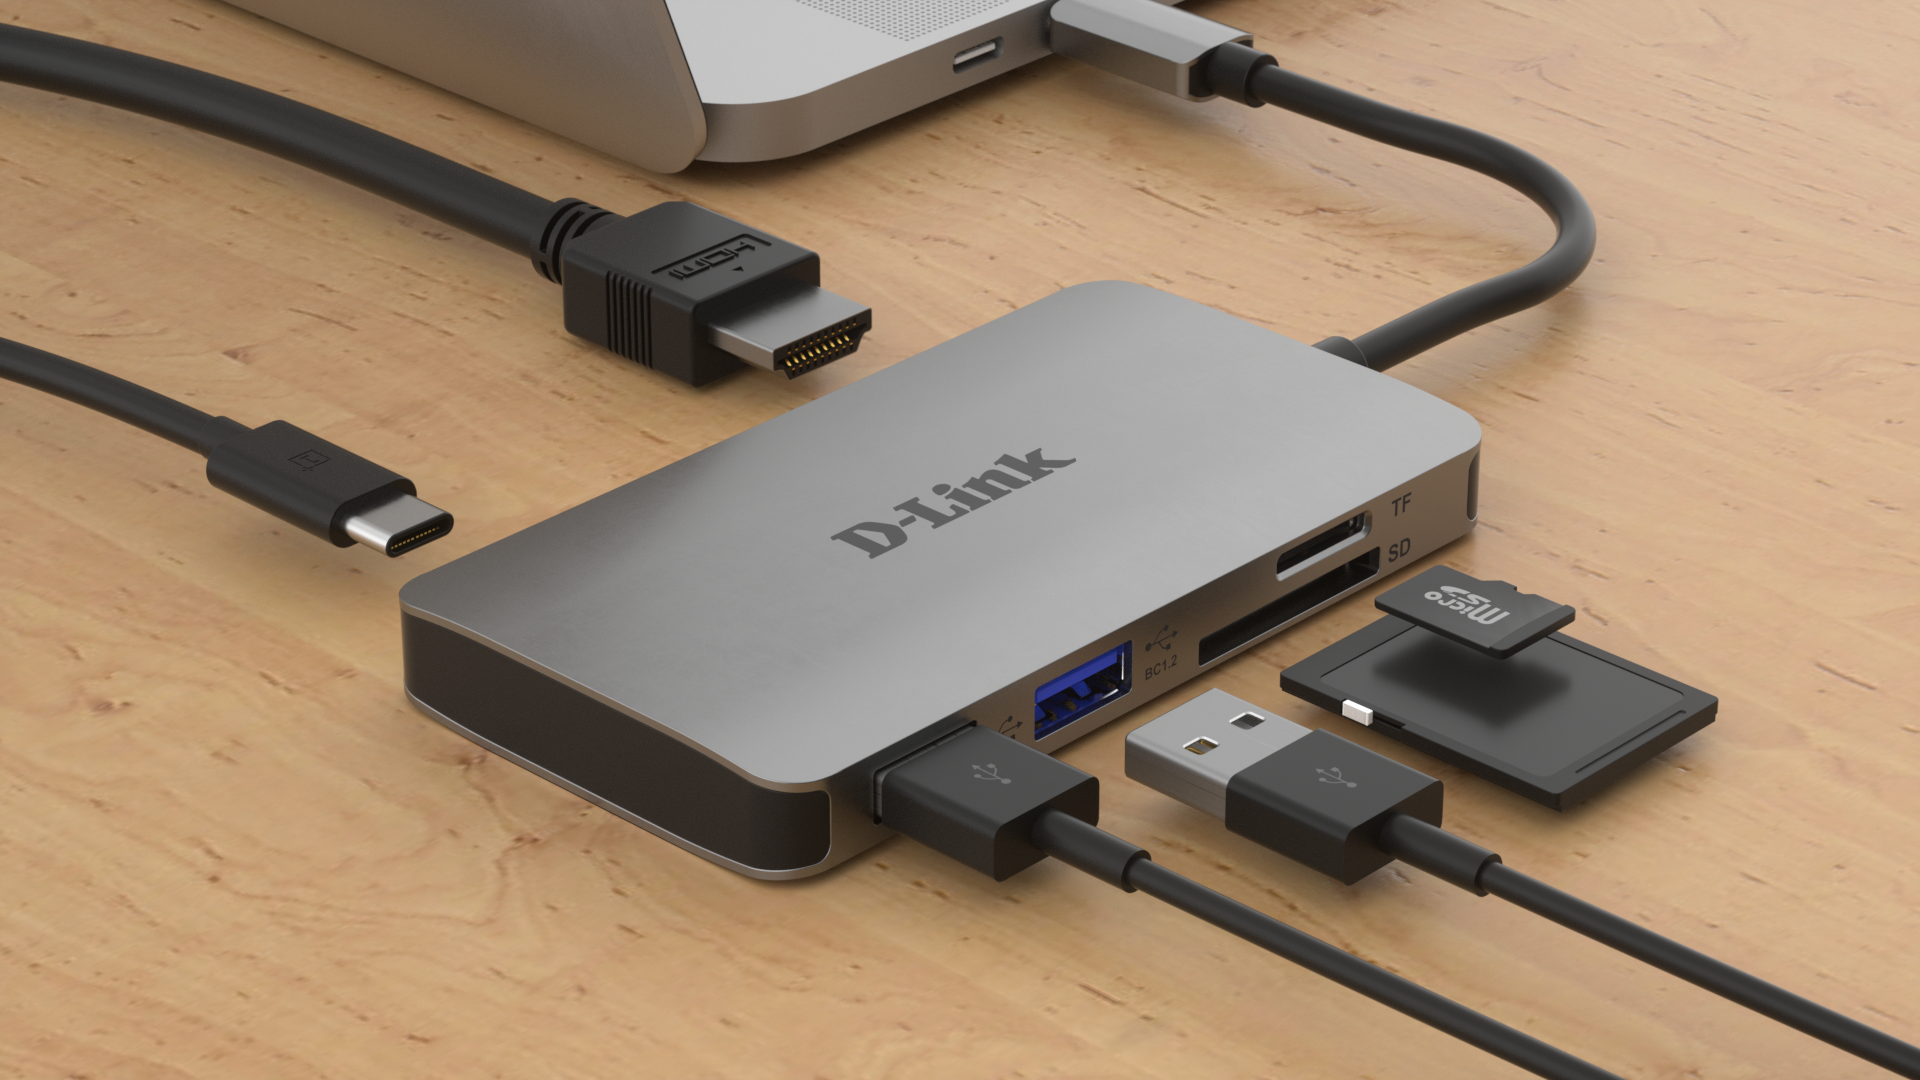 DUB-M610 6-in-1 USB-C Hub with HDMI/Card Reader/Power Delivery - on a desk with example connections